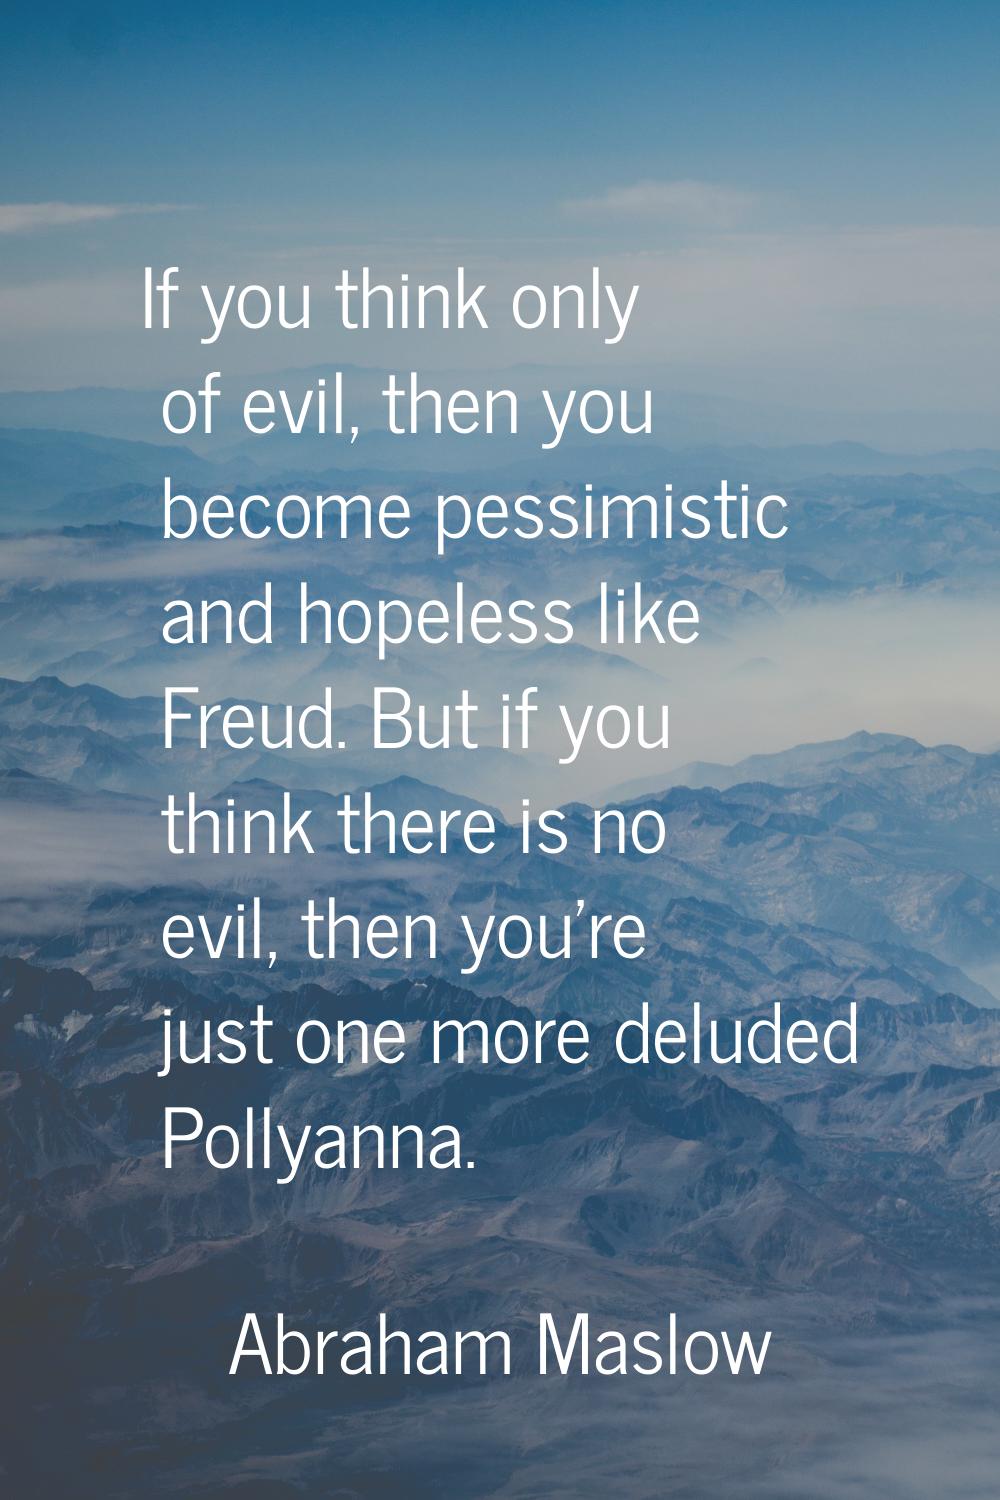 If you think only of evil, then you become pessimistic and hopeless like Freud. But if you think th